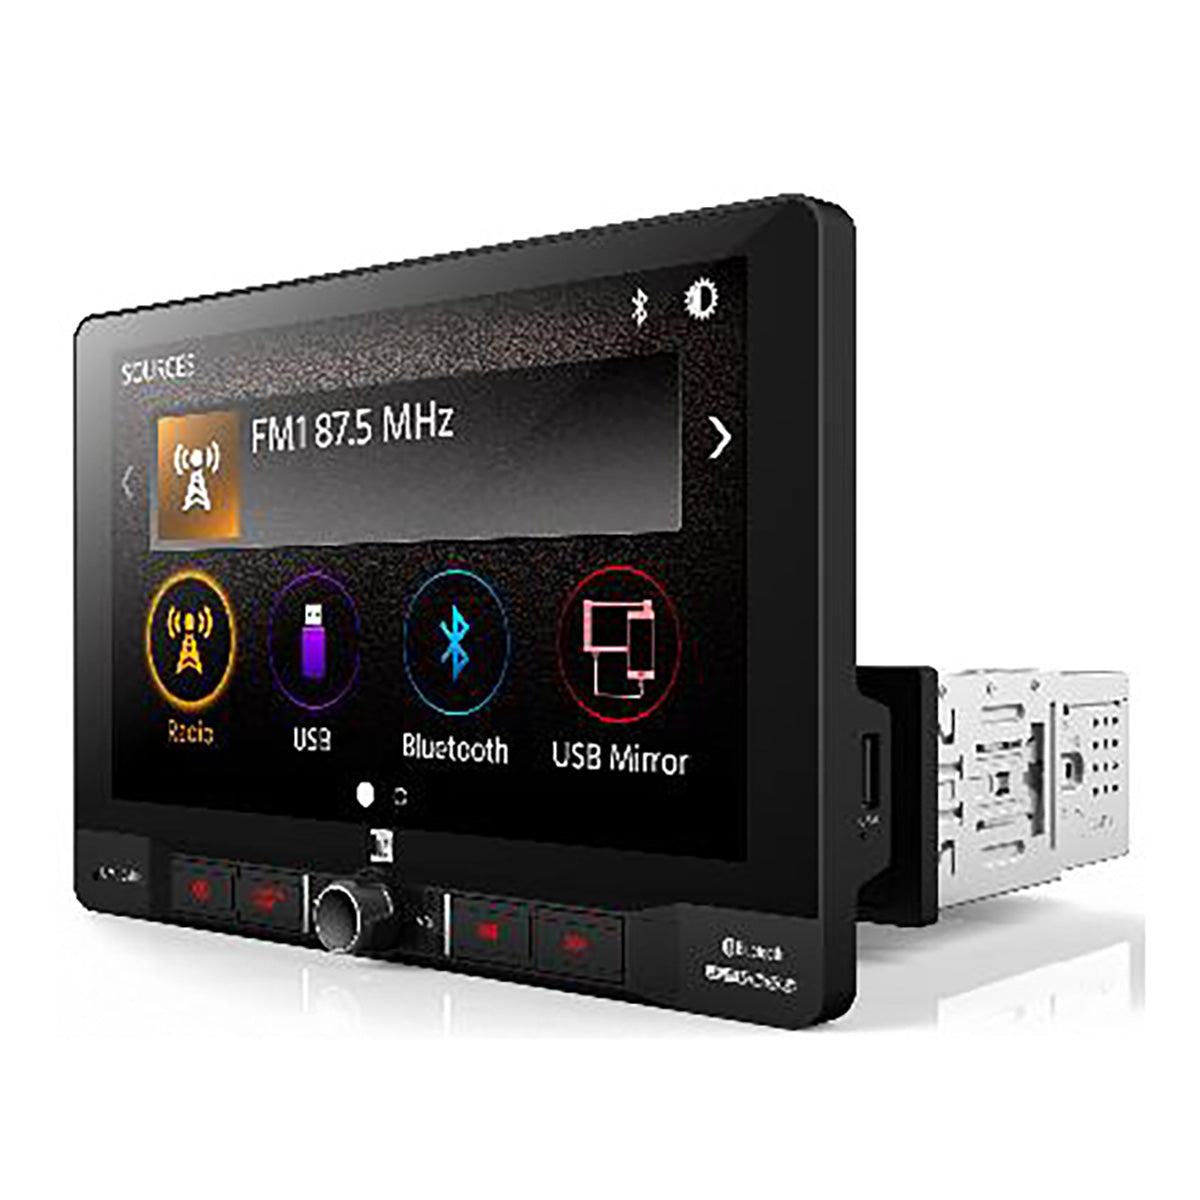 Dual 9" Mechless Mirroring Bluetooth Av Single Din Receiver Usb Mirroring For Android & Appleam/fm